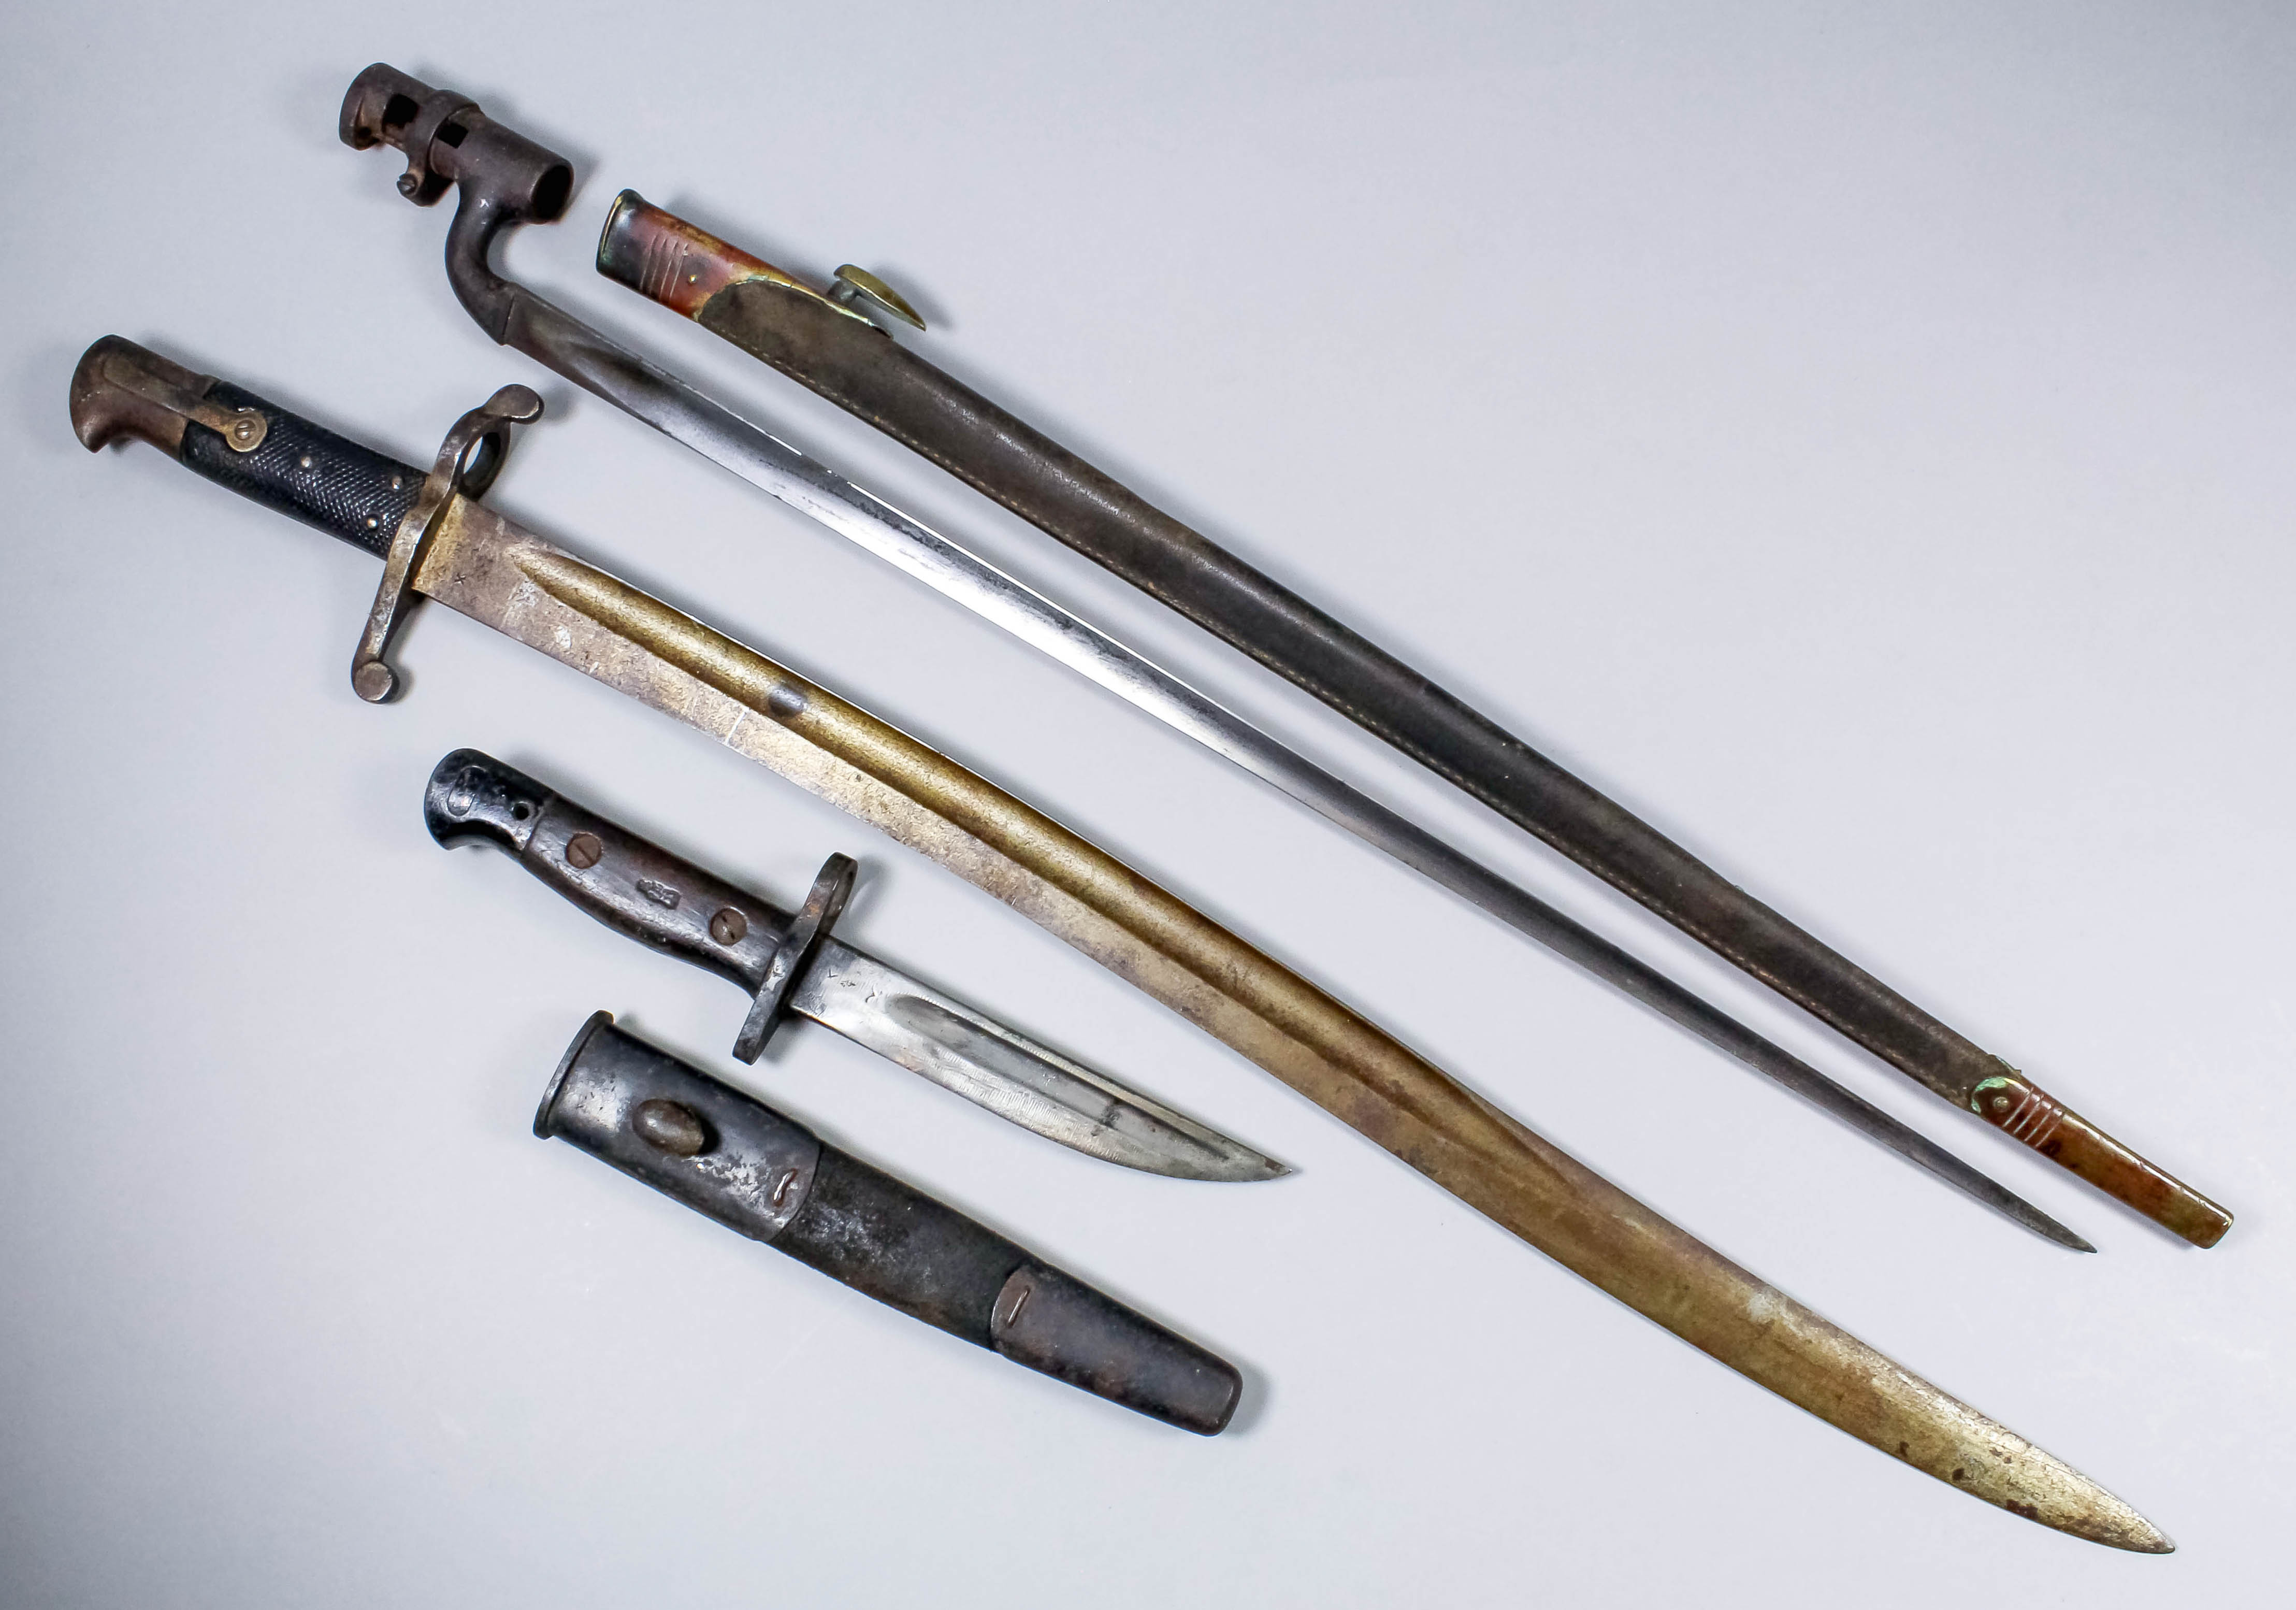 Three bayonets - 1907 Wilkinson (cut down to form trench knife) with ...